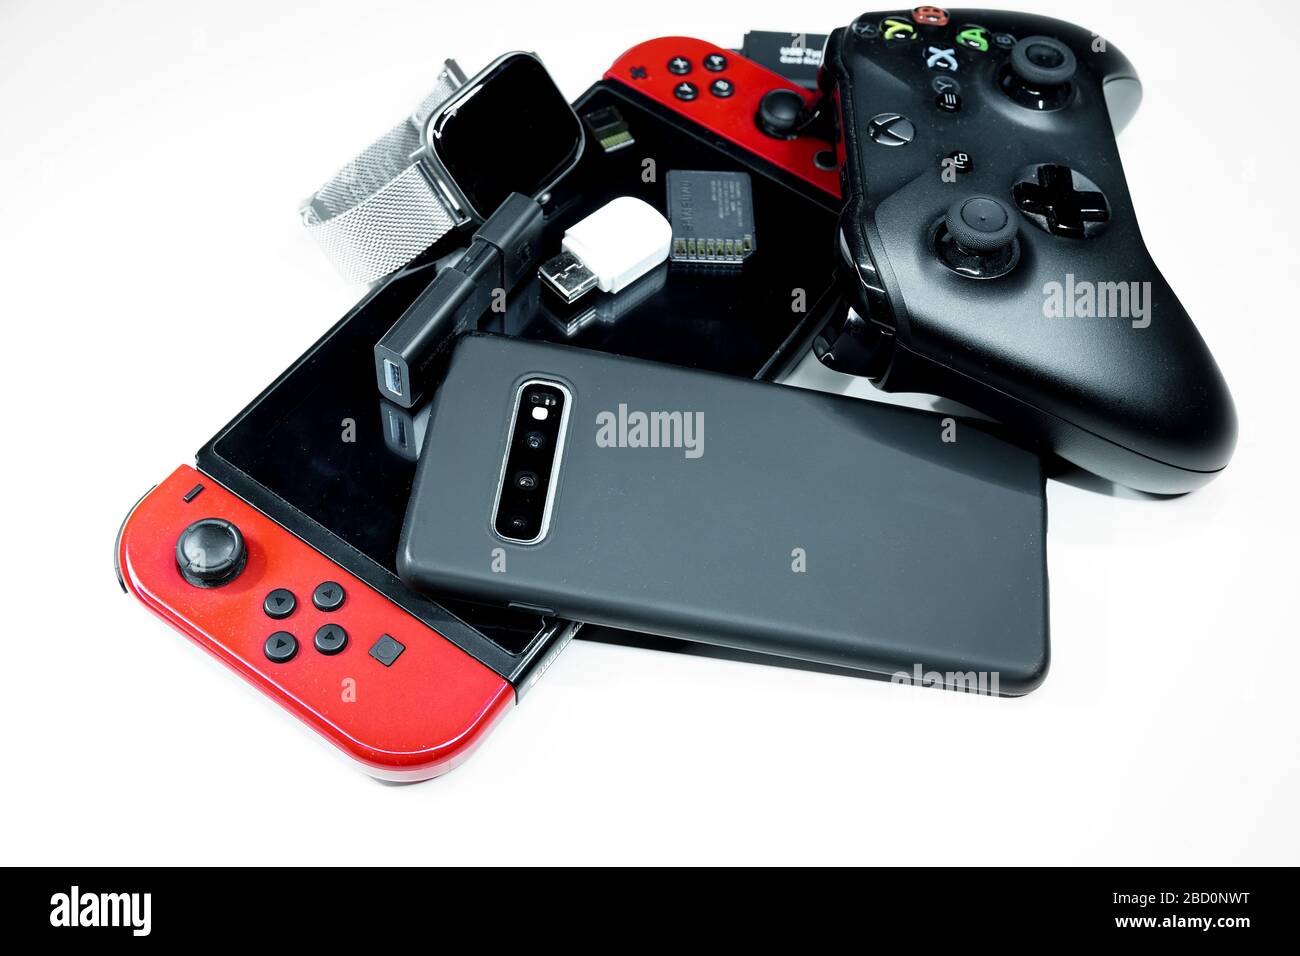 Pile of hi tech devices,console gaming, xbox controller,smartphone,addiction Stock Photo